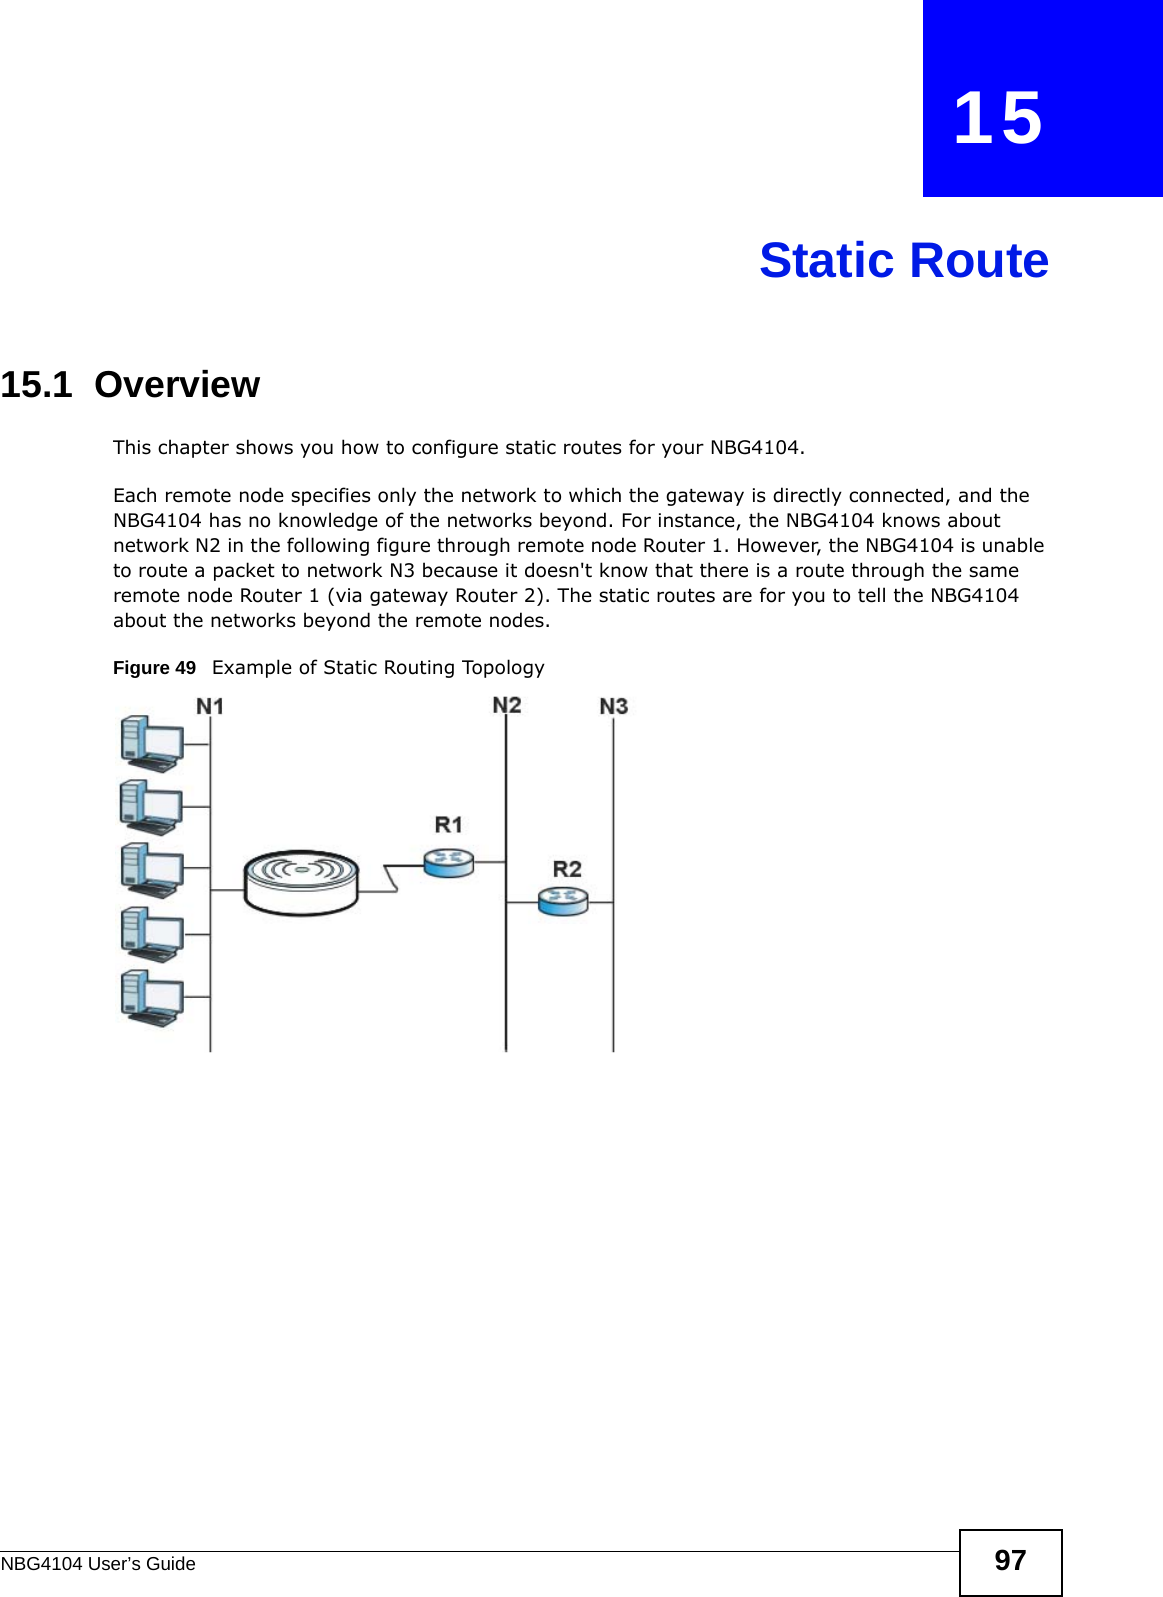 NBG4104 User’s Guide 97CHAPTER   15Static Route15.1  Overview   This chapter shows you how to configure static routes for your NBG4104.Each remote node specifies only the network to which the gateway is directly connected, and the NBG4104 has no knowledge of the networks beyond. For instance, the NBG4104 knows about network N2 in the following figure through remote node Router 1. However, the NBG4104 is unable to route a packet to network N3 because it doesn&apos;t know that there is a route through the same remote node Router 1 (via gateway Router 2). The static routes are for you to tell the NBG4104 about the networks beyond the remote nodes.Figure 49   Example of Static Routing Topology